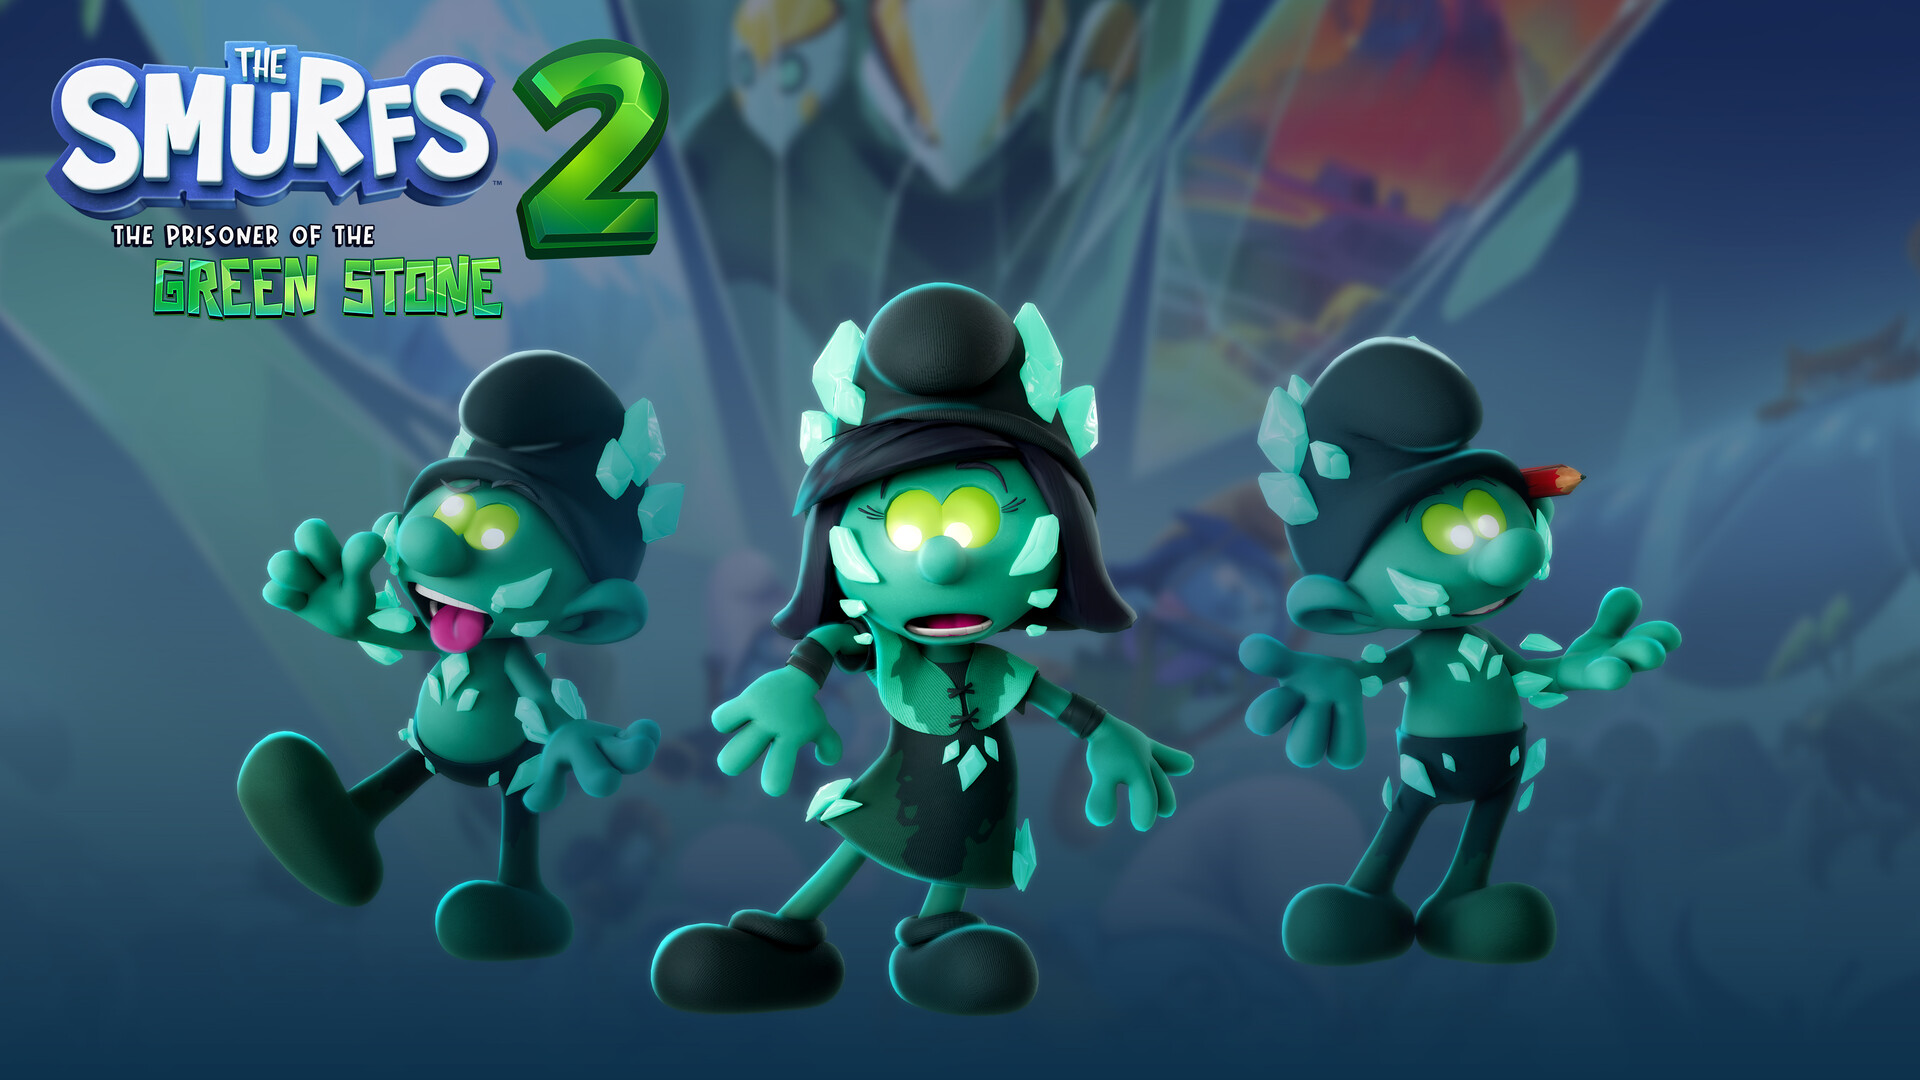 The Smurfs 2: The Prisoner of the Green Stone - Corrupted Outfit DLC GOG CD Key [USD 1.3]